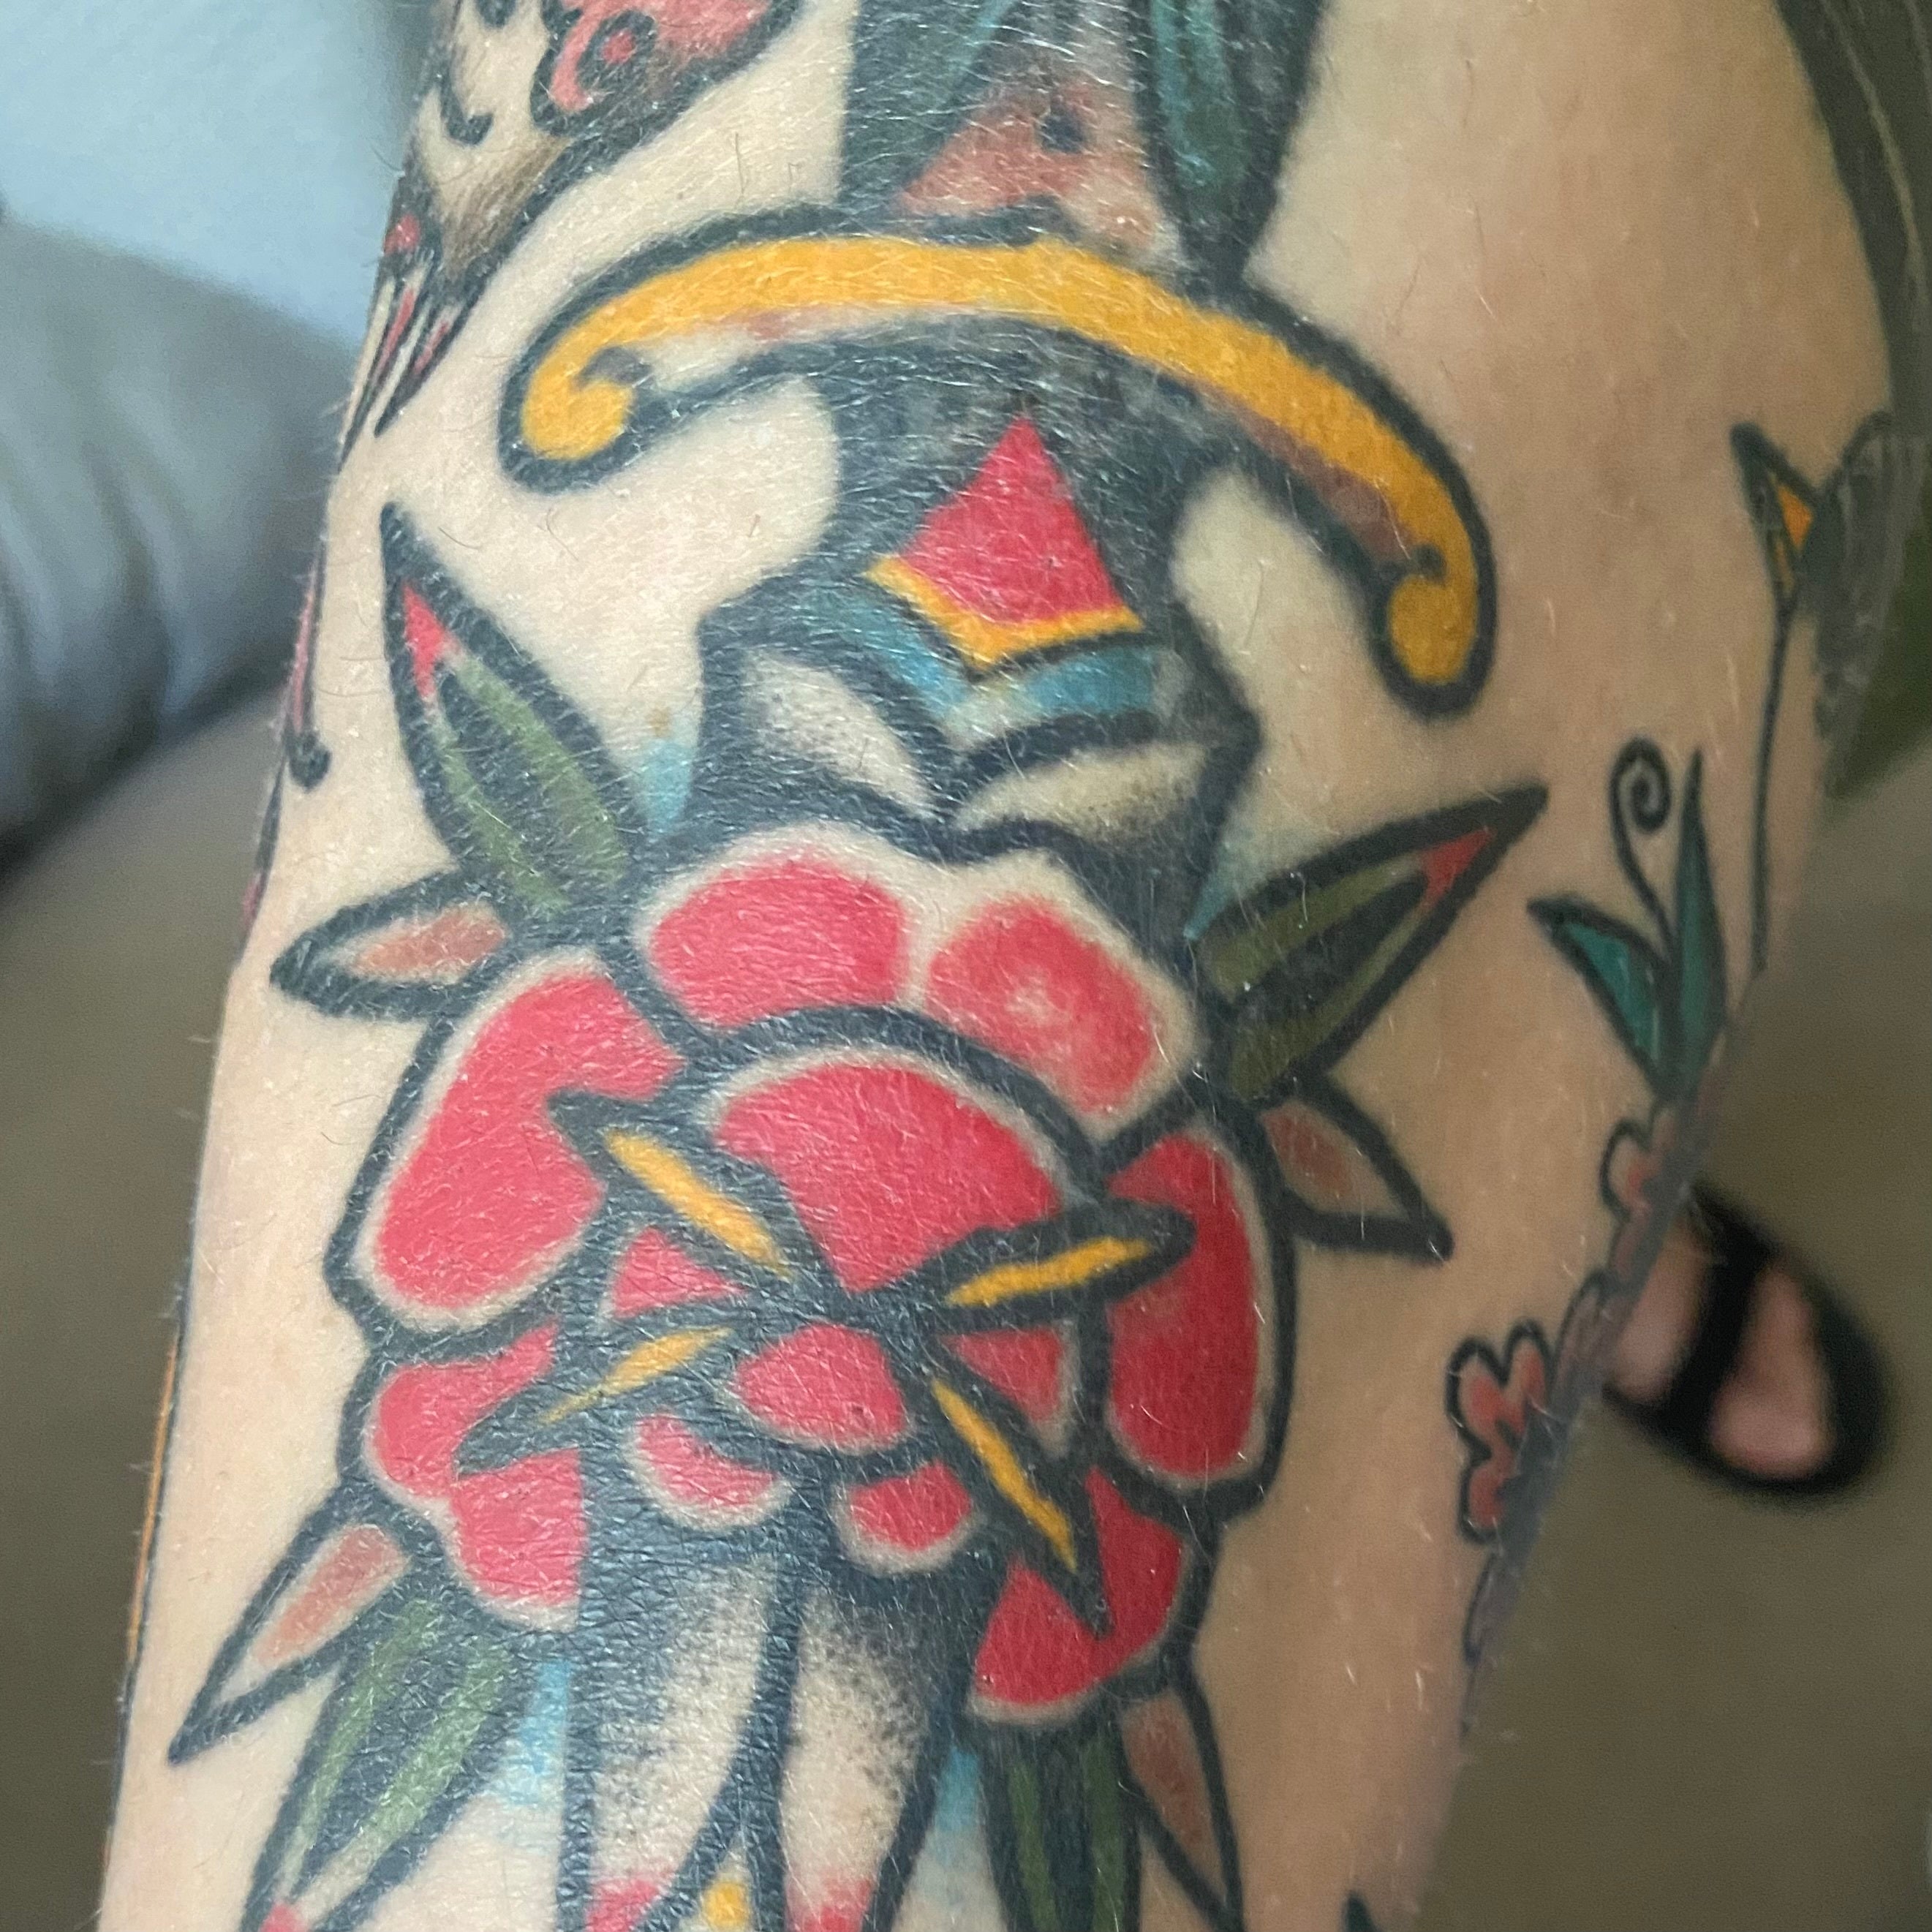 Why Does My New Tattoo Look Shiny? - AuthorityTattoo